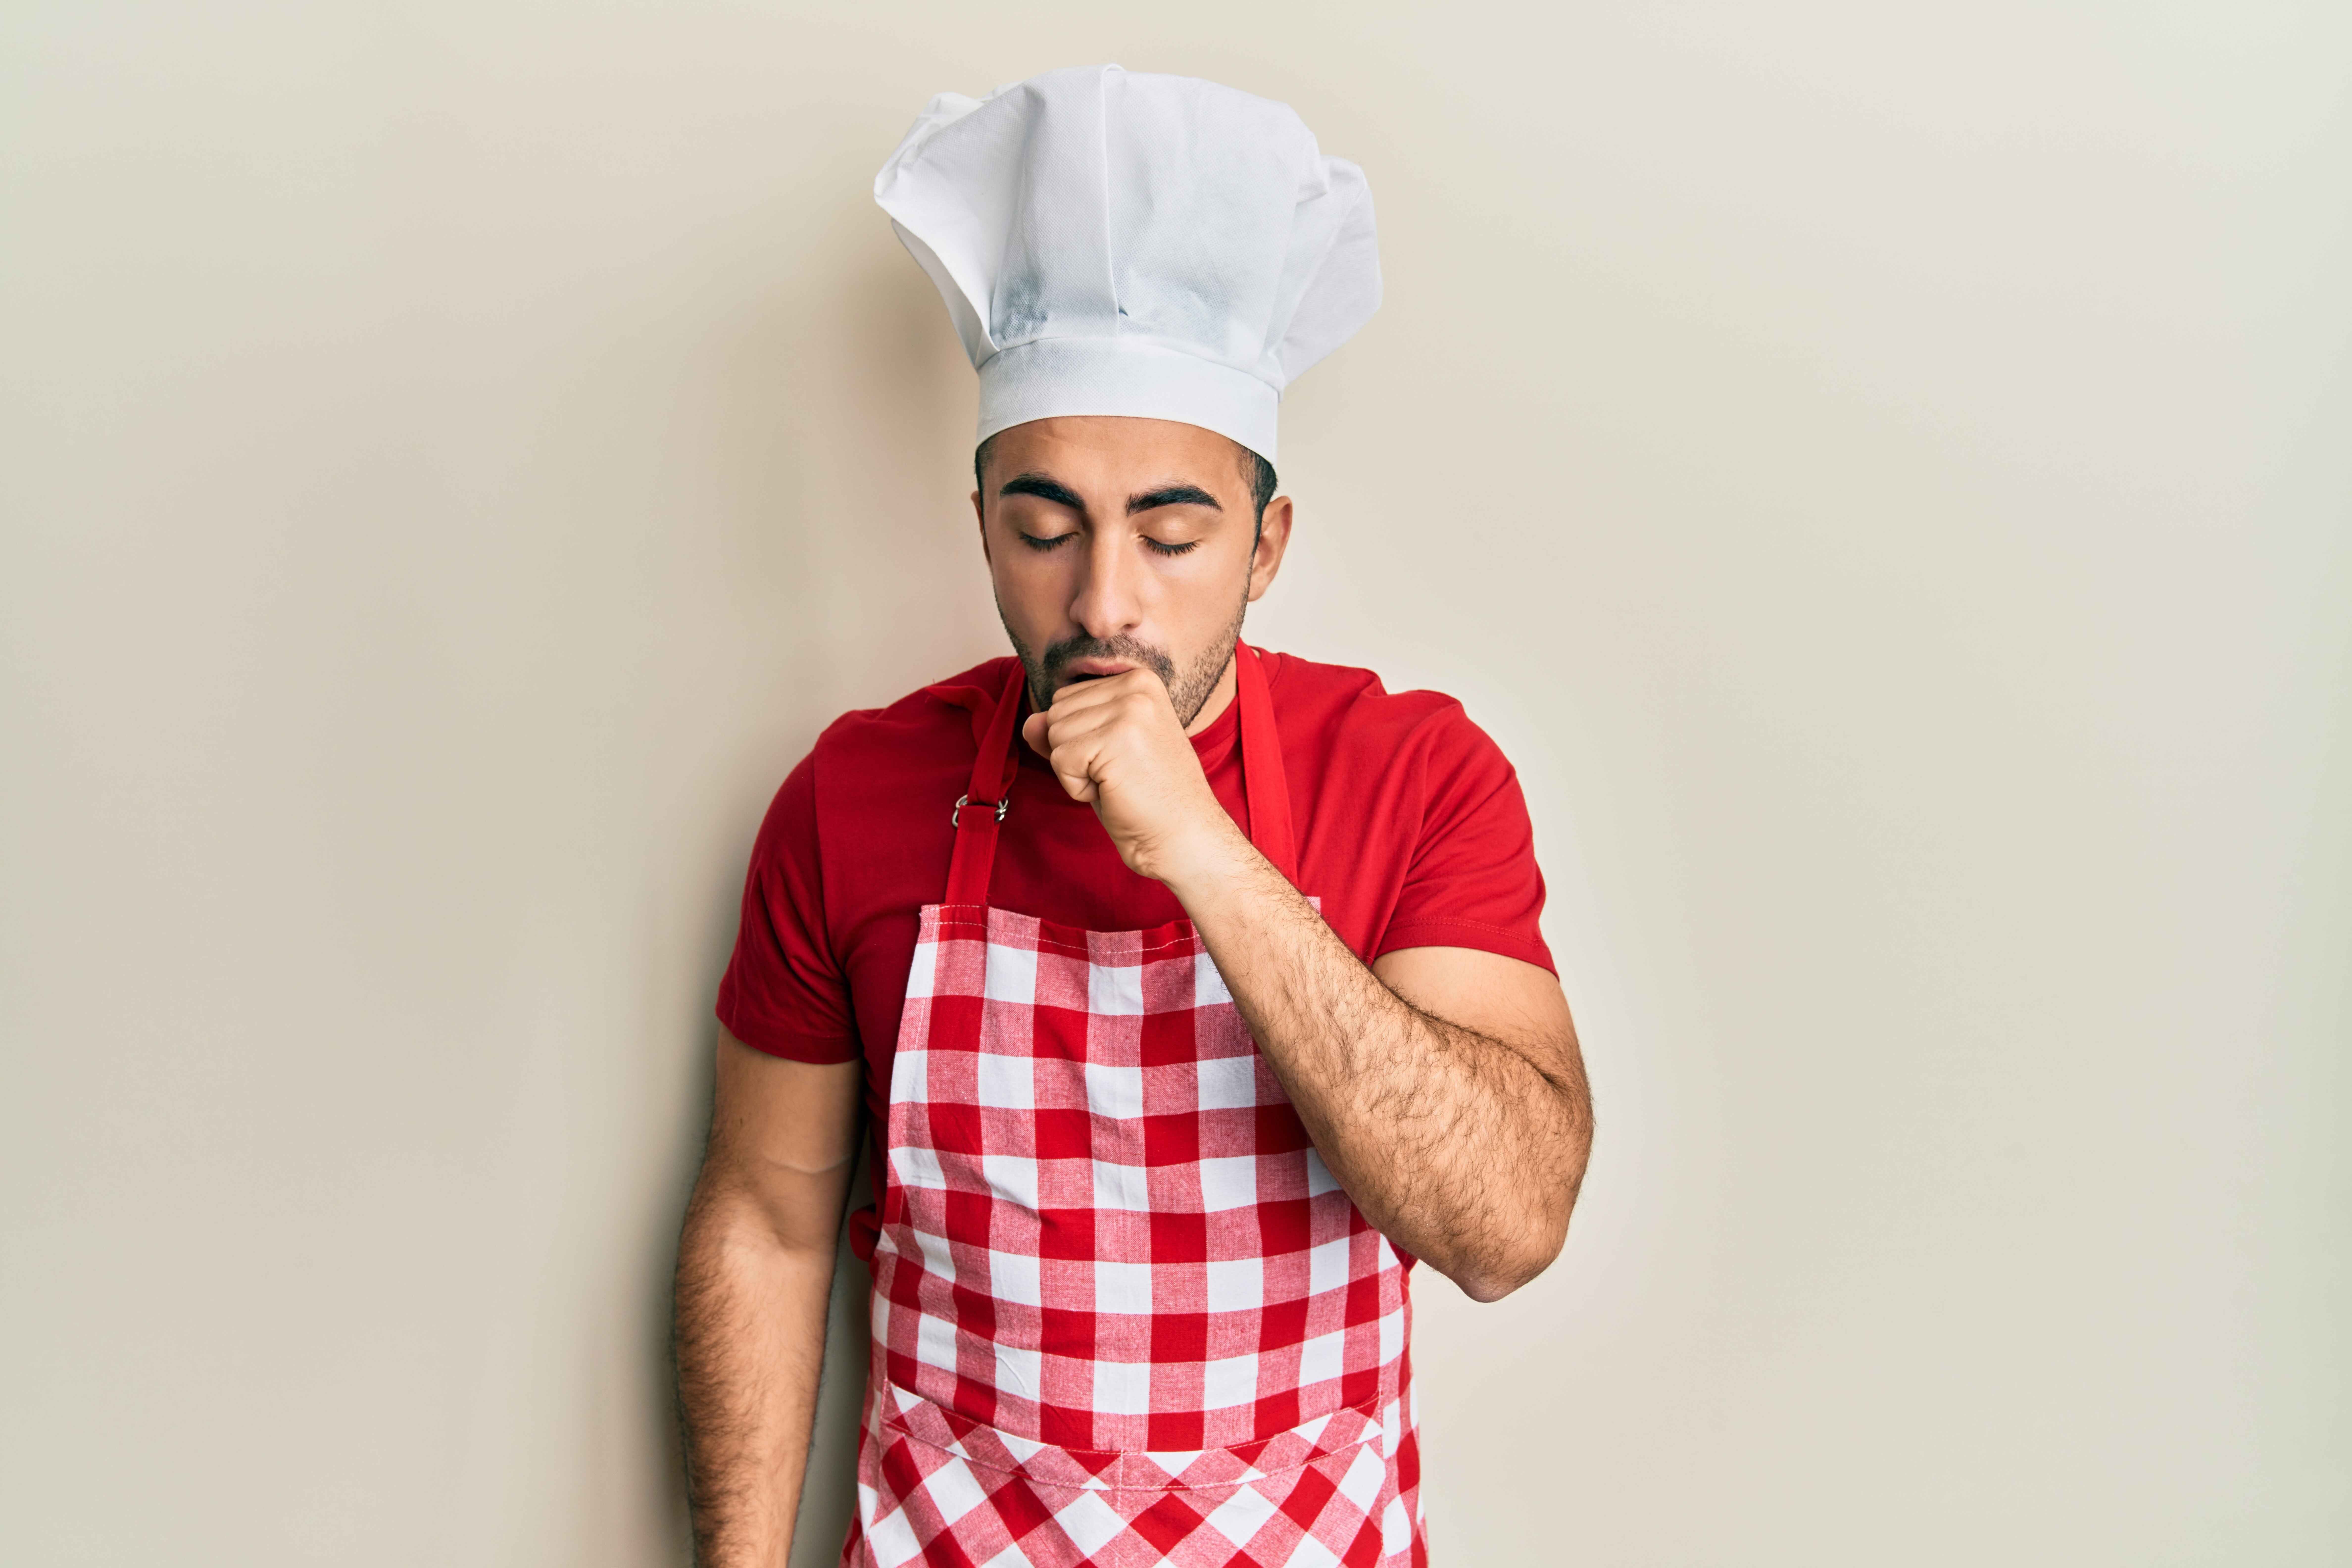 Chef coughing with suspected norovirus